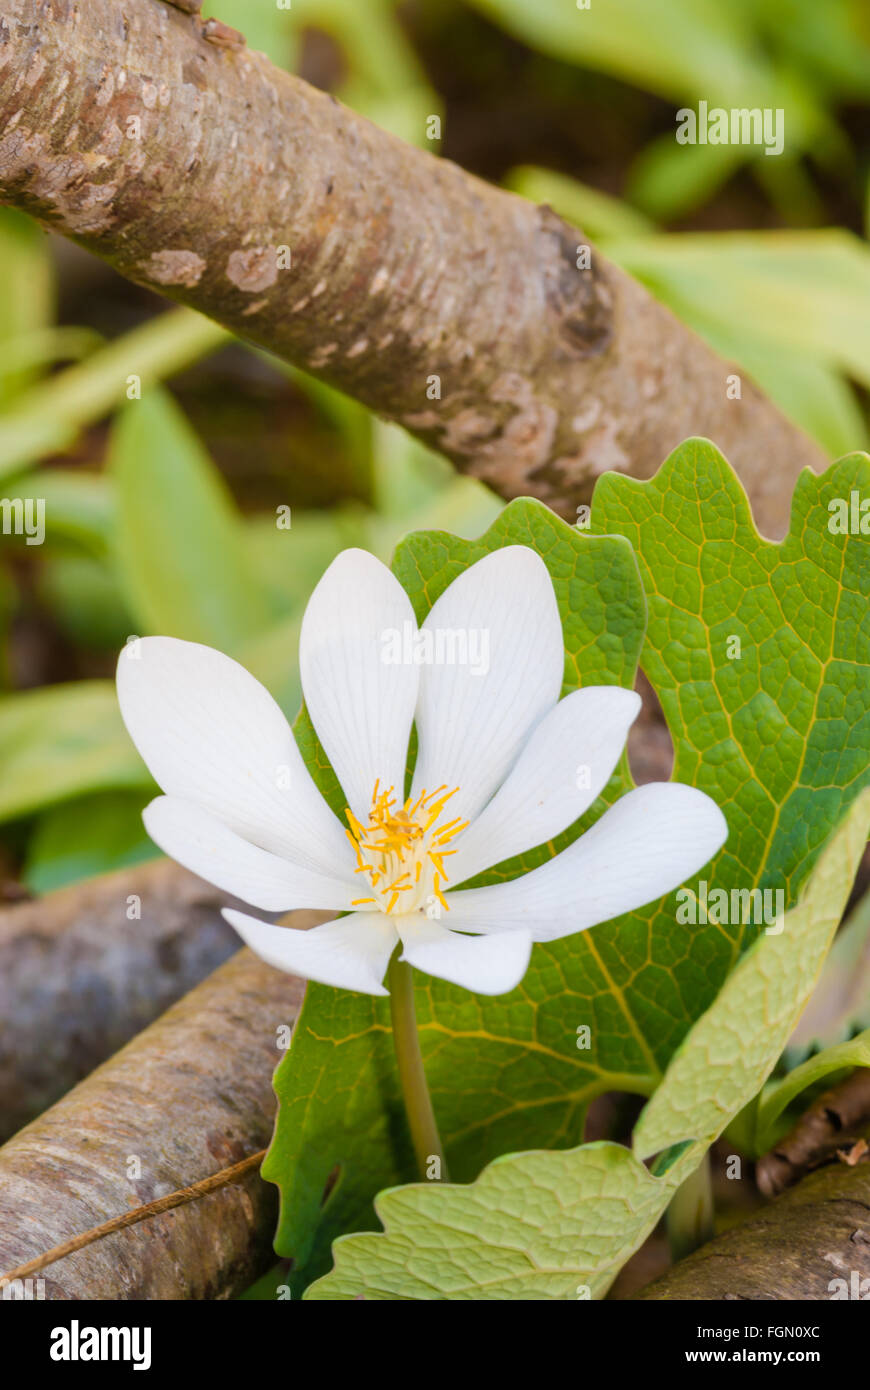 A bloodroot flower, Sanguinaria canadensis, growing in the woodlands of the Parrot's Bay Conservation Area, Ontario, Canada Stock Photo